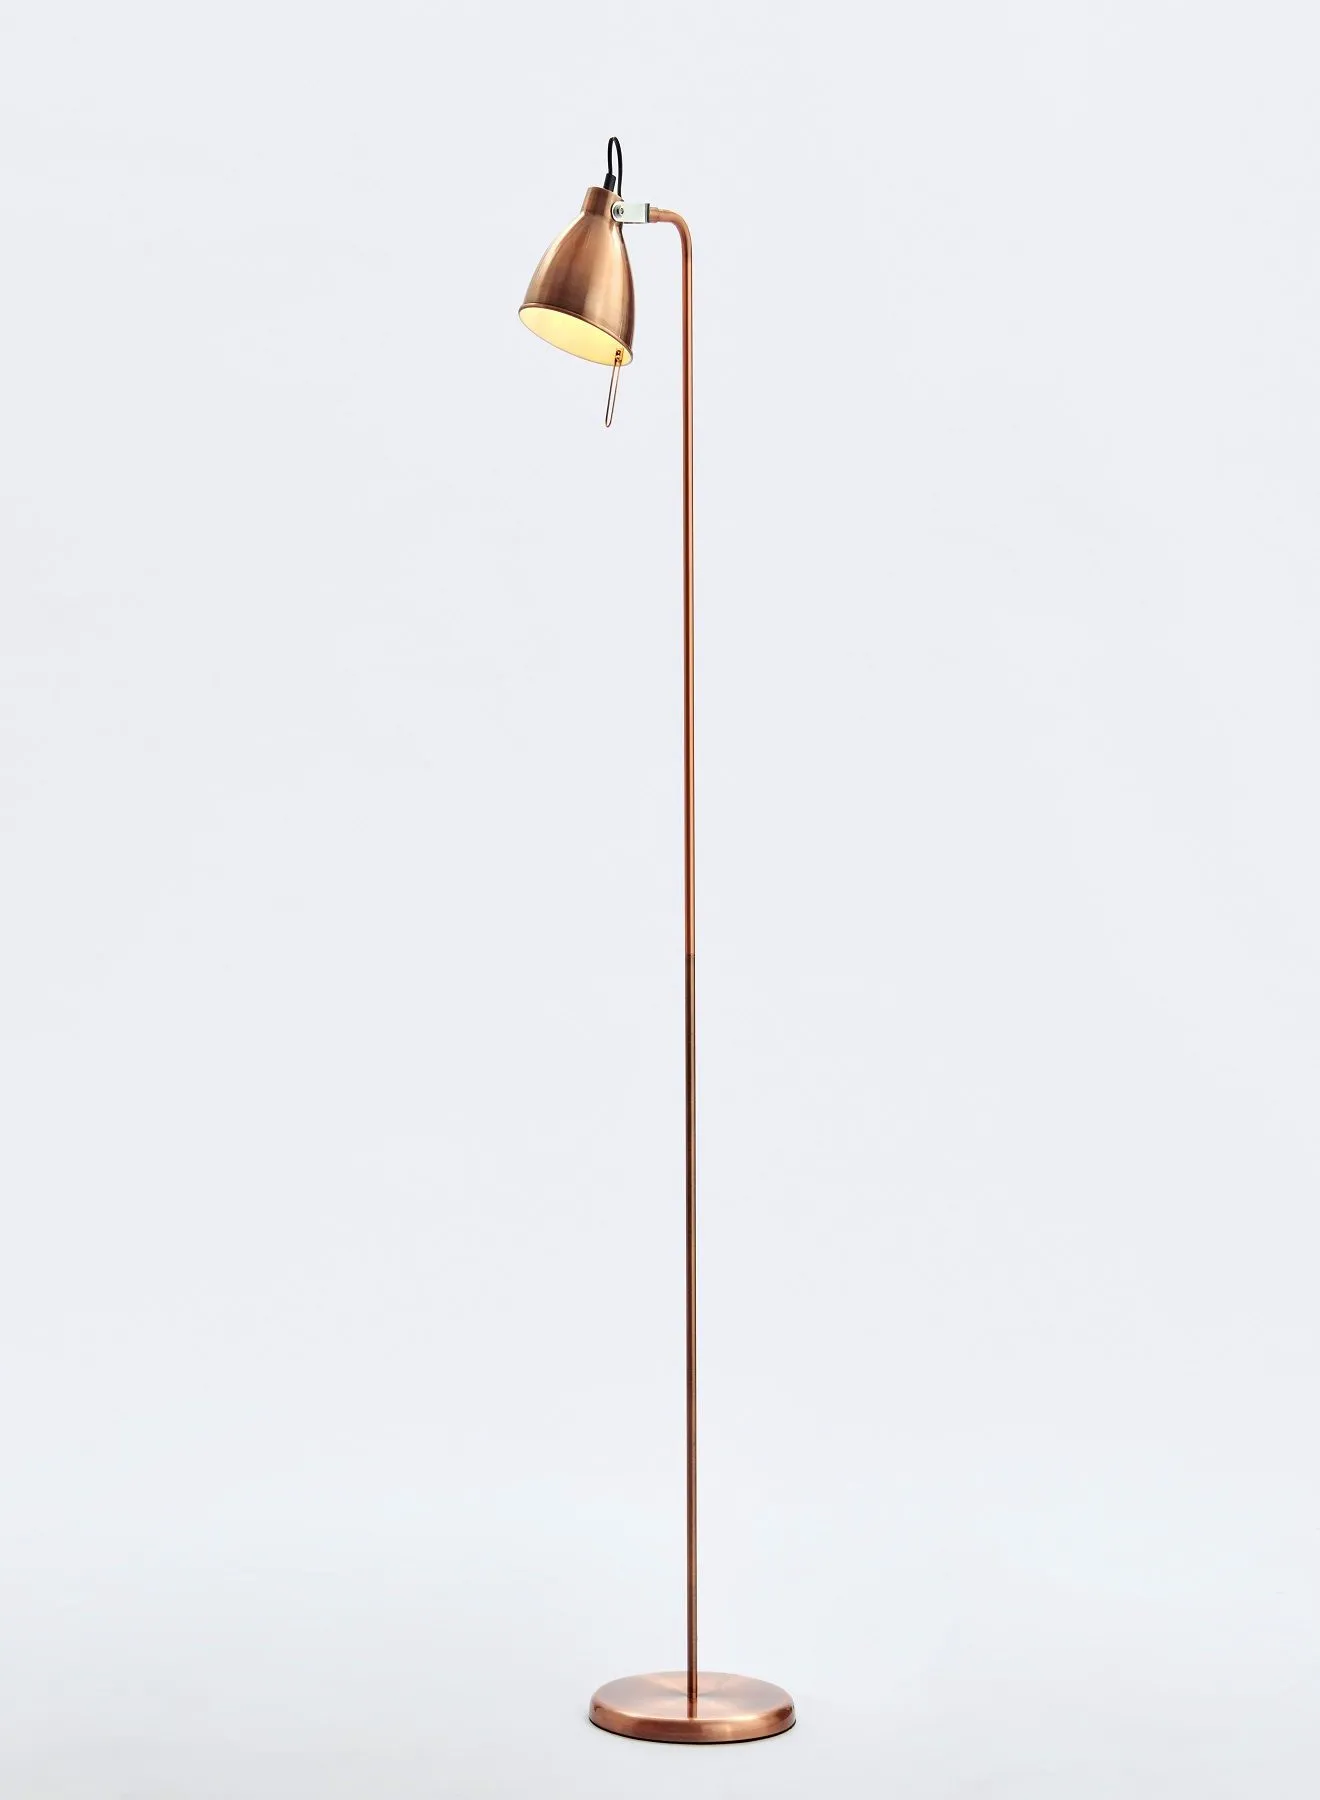 Switch Modern Decorative Floor Lamp Unique Luxury Quality Material For The Perfect Stylish Home FL528010 Red/Black 32X19XH81.5cm